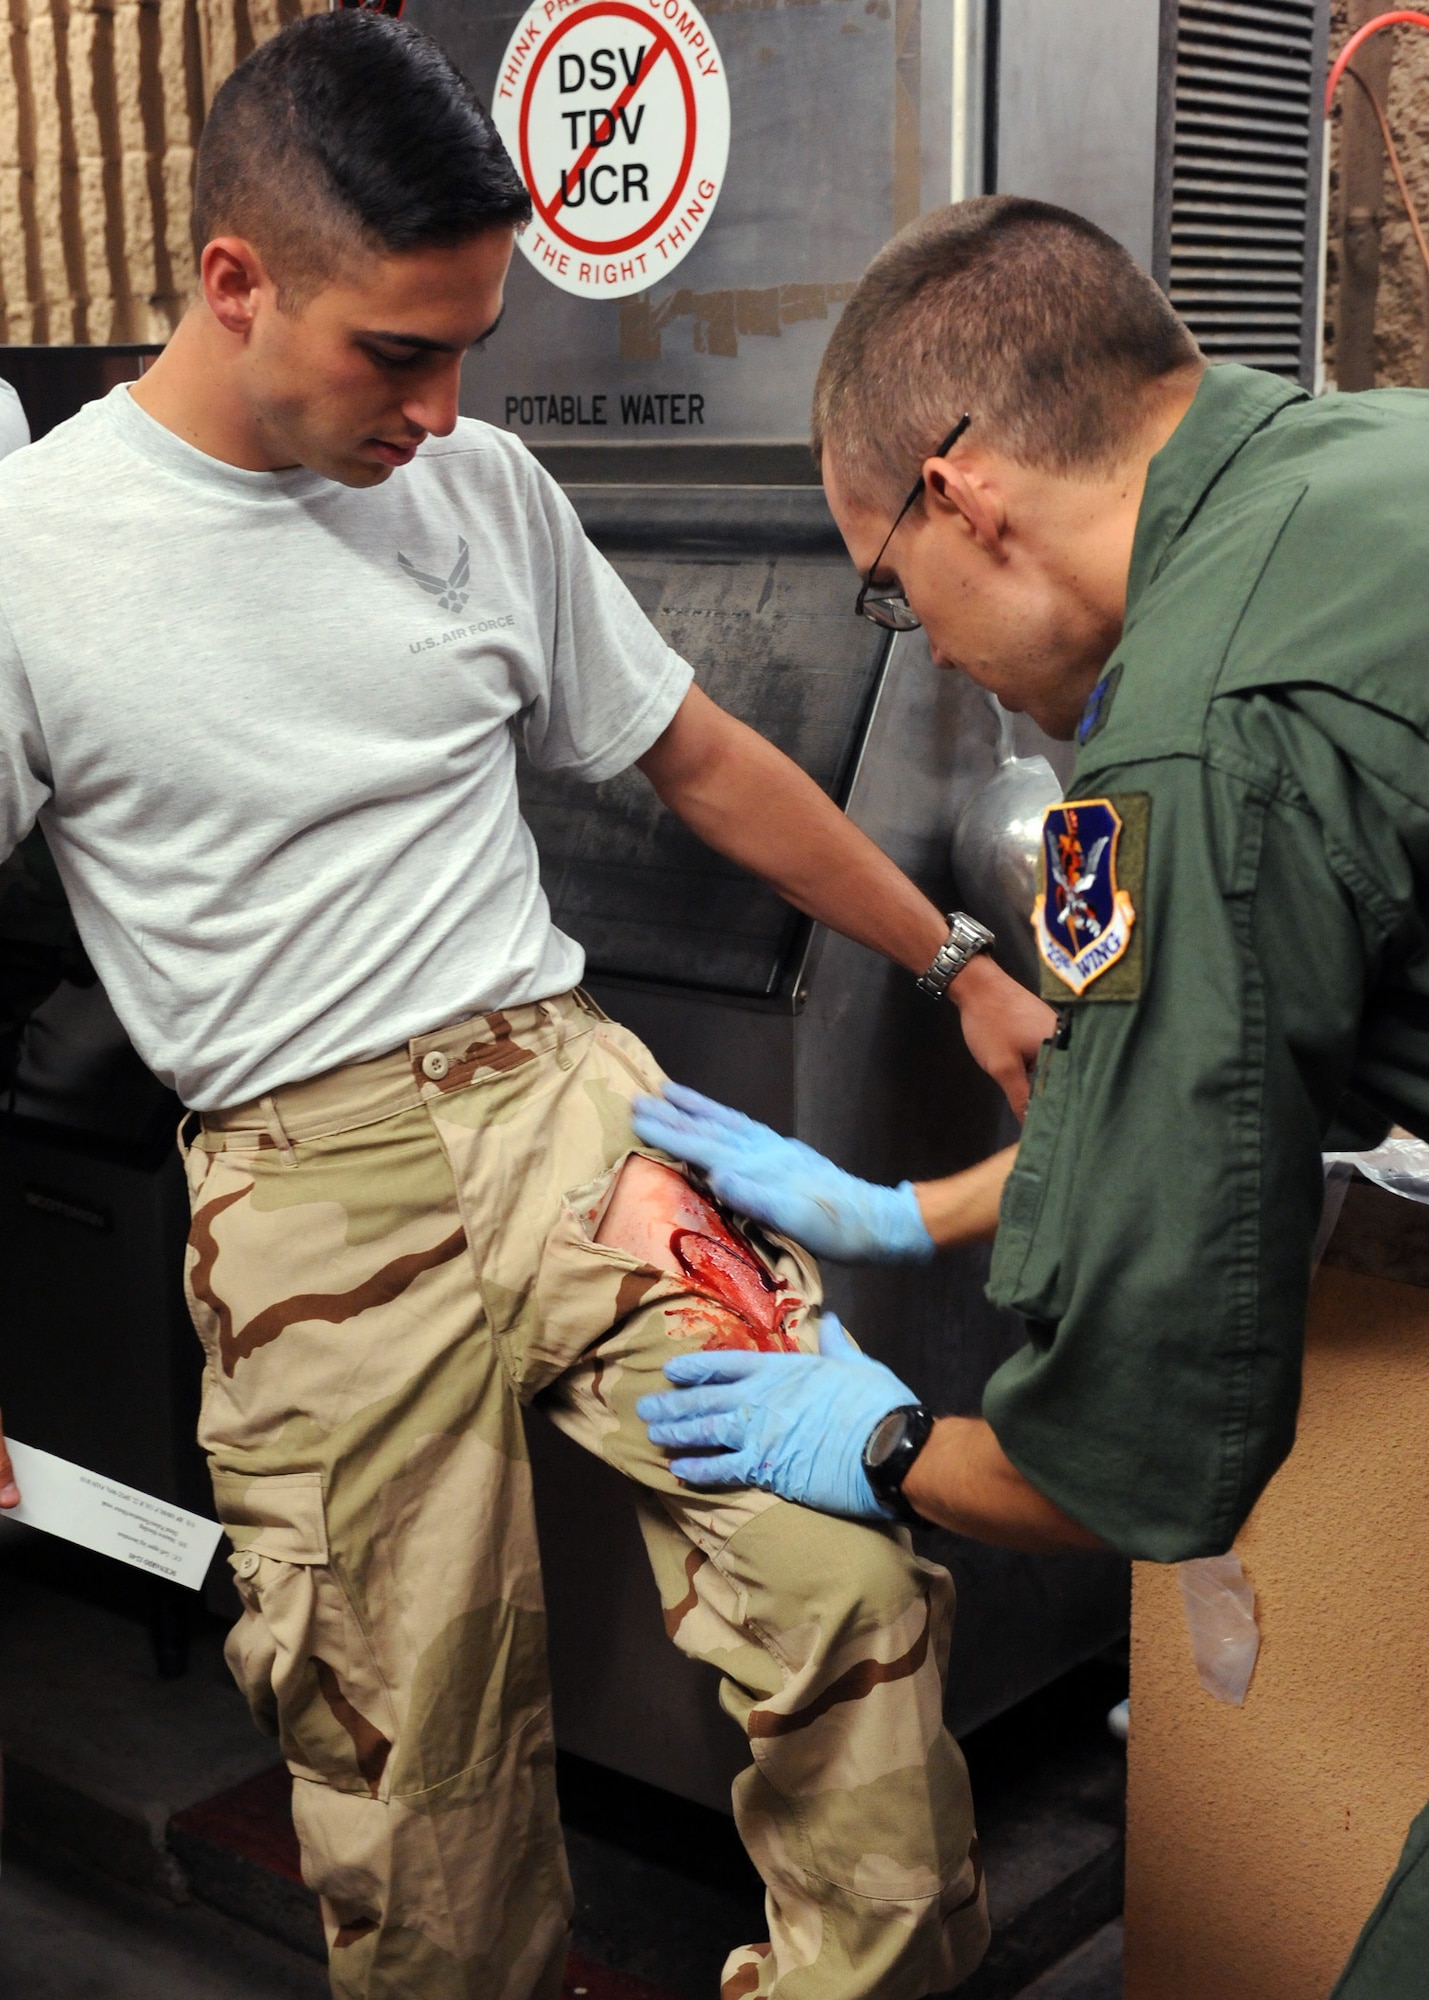 DAVIS-MONTHAN AIR FORCE BASE, Ariz. – Capt. Erik DeSoucy, 563rd Operations Support Squadron flight physician, applies fake blood to the pants of Braden Vincent, University of Arizona Air Force ROTC cadet, to aid in the realism of the Vincent’s simulated injury during the Angel Thunder exercise here Oct. 11. Approximately 1,400 U.S. Military, federal and state employees, and coalition forces are participating in the fifth-annual Angel Thunder exercise, the largest military combat search and rescue exercise in the world. (U.S. Air Force photo/Airman 1st Class Timothy D. Moore)